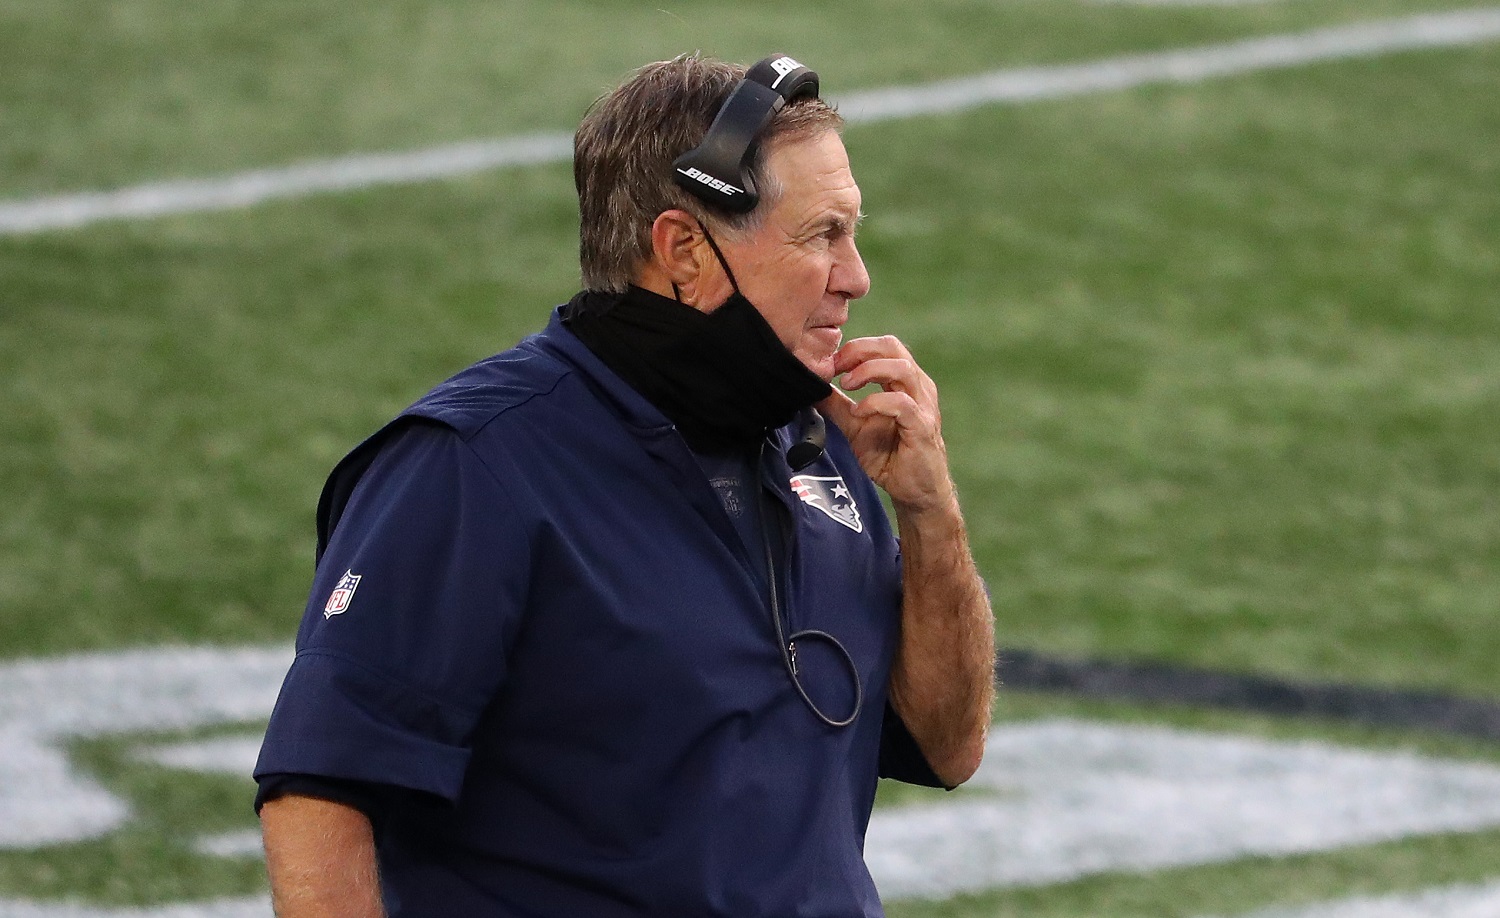 Bill Belichick of the New England Patriots looks on from the sidelines during their NFL game against the San Francisco 49ers at Gillette Stadium on Oct. 25, 2020.